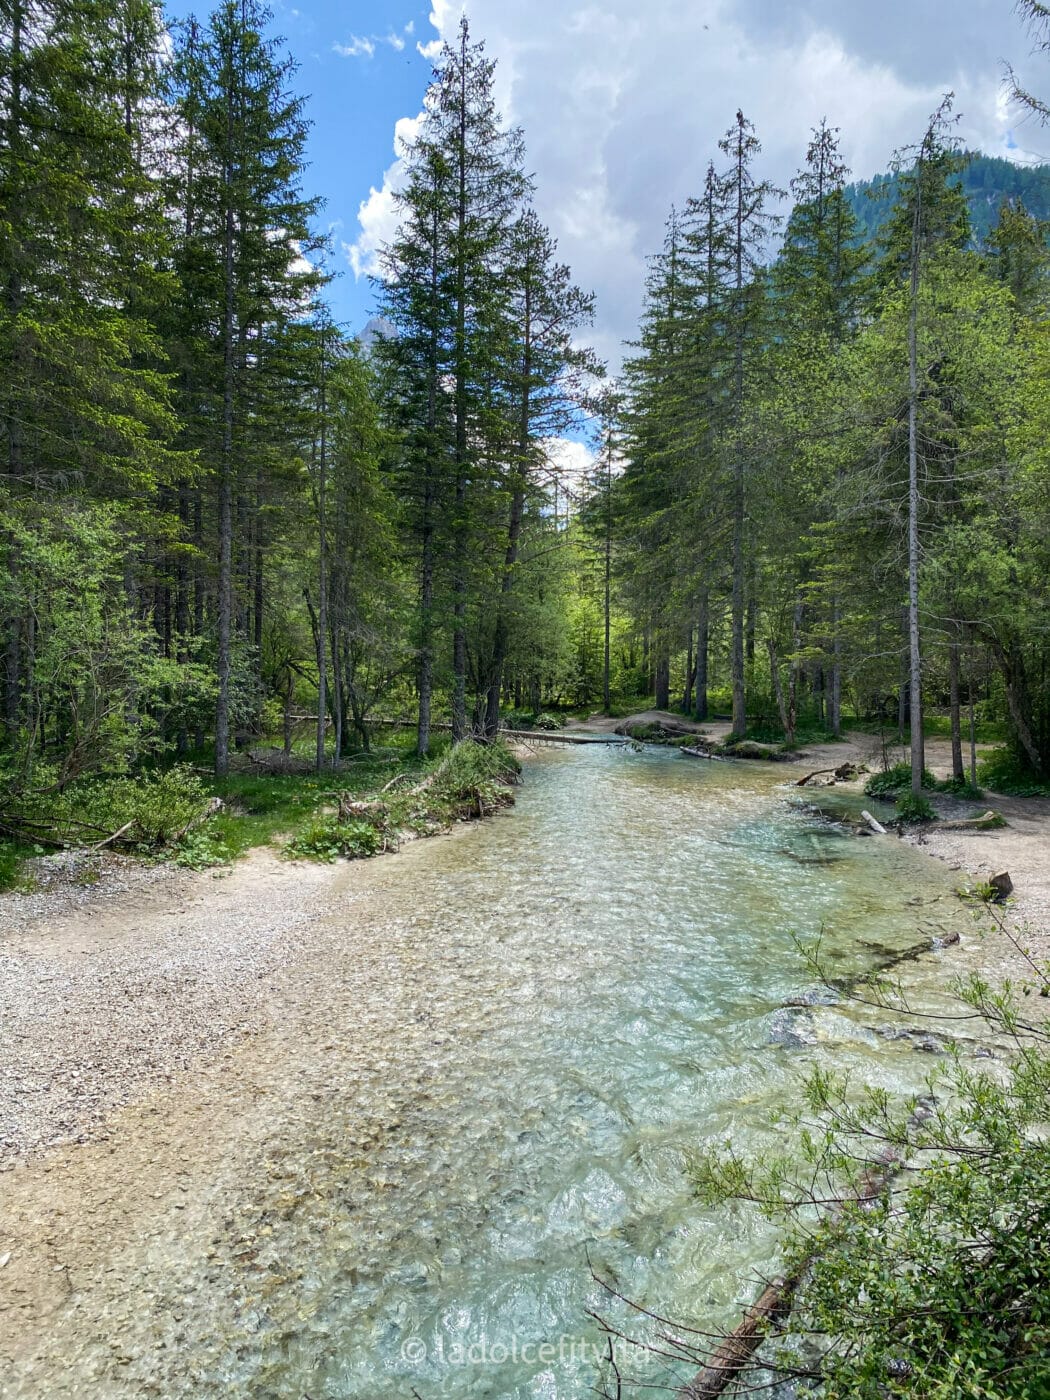 Turquoise Rienza river with bordering pine trees on the shoreline